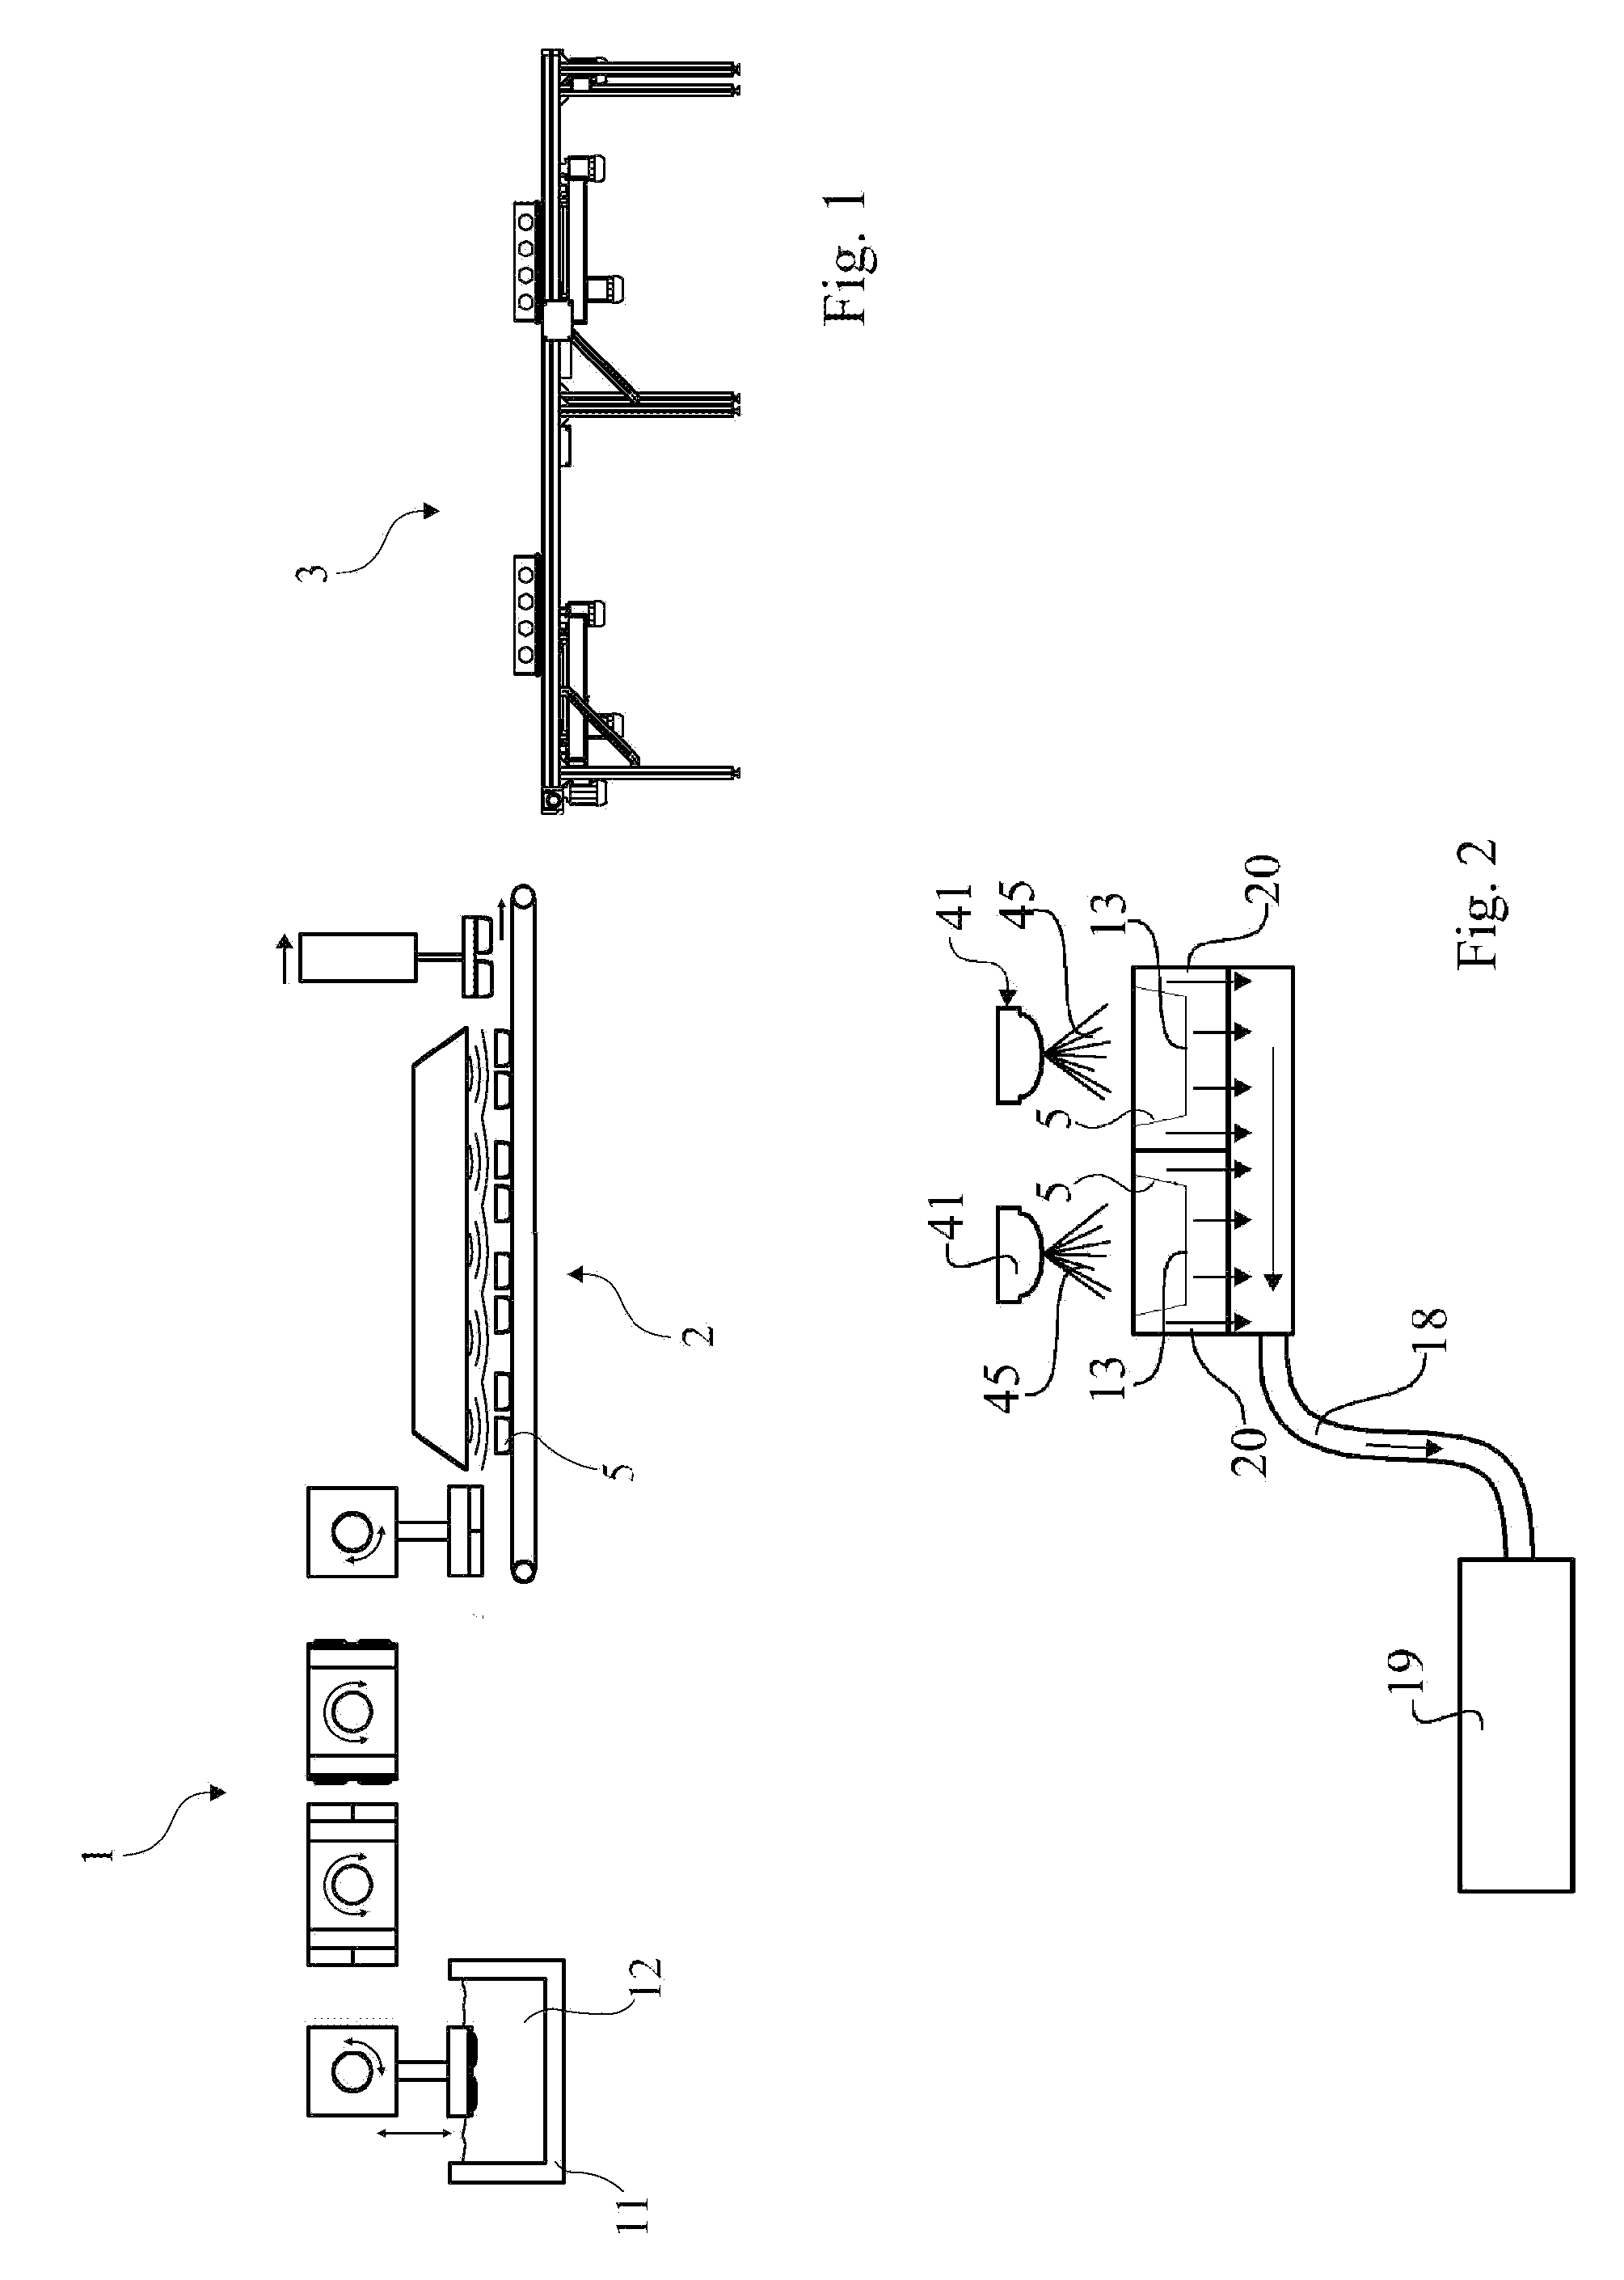 Method for Applying a Barrier on Moulded Fibrous Product and a Product Produced by Said Method